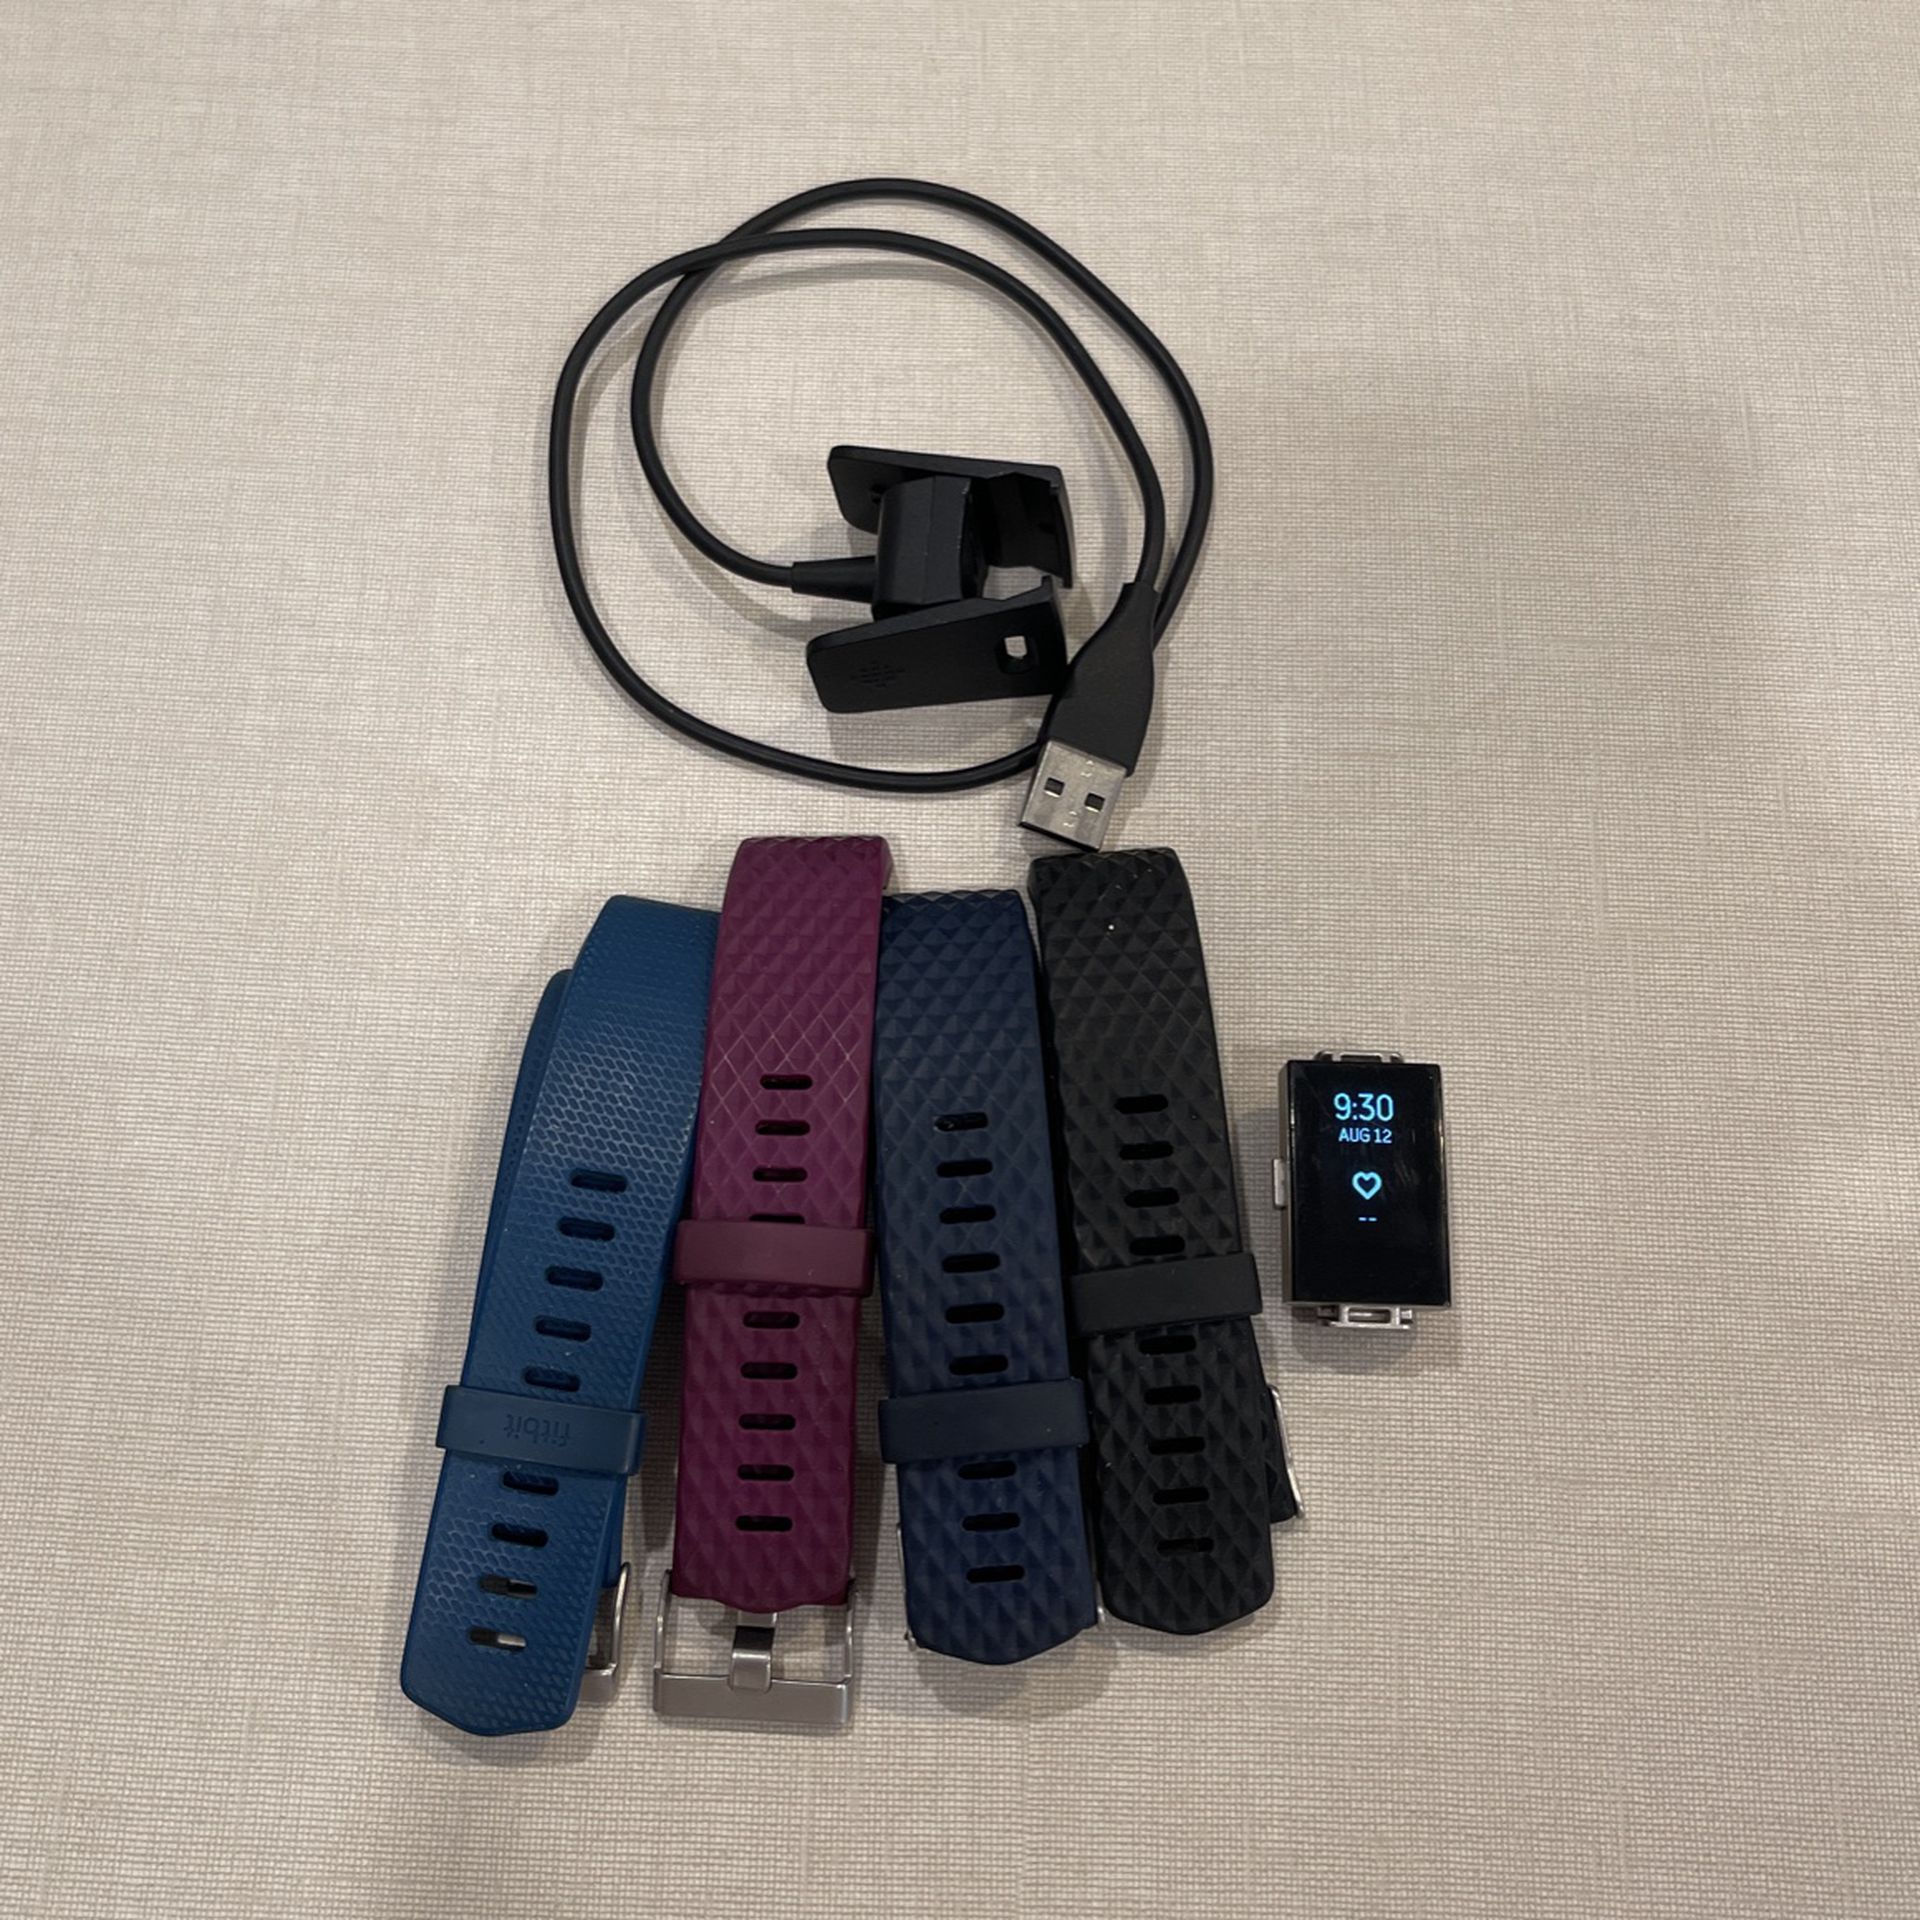 Fitbit Charge 2 Charger And 4 Bands!!